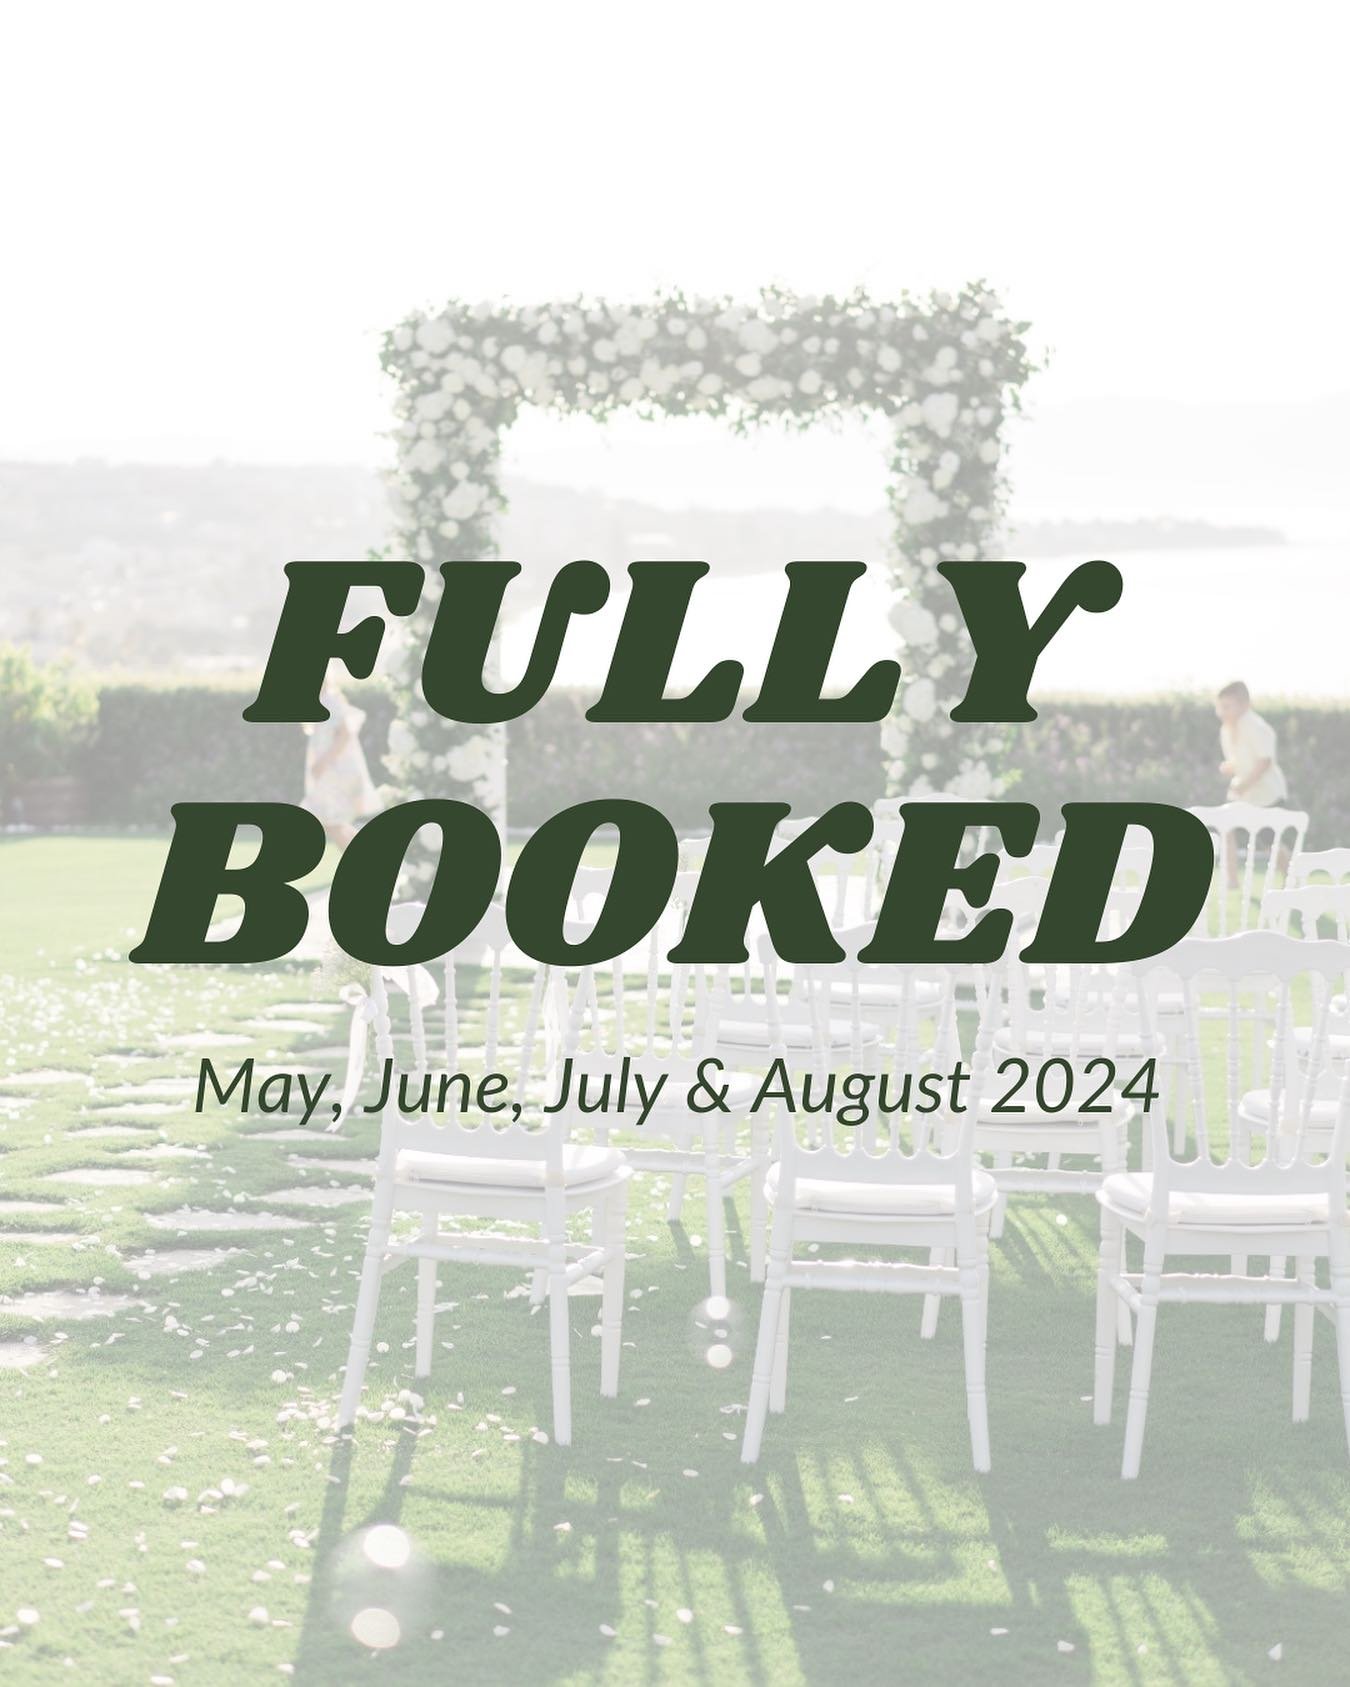 Dear parents, dear wedding planners,
We are happy to announce that we are 𝙛𝙪𝙡𝙡𝙮 𝙗𝙤𝙤𝙠𝙚𝙙 from May to August 2024. At the same time, we are sad that we cannot offer our services to some of you!
&bull;
Of course I will respond to your emails a